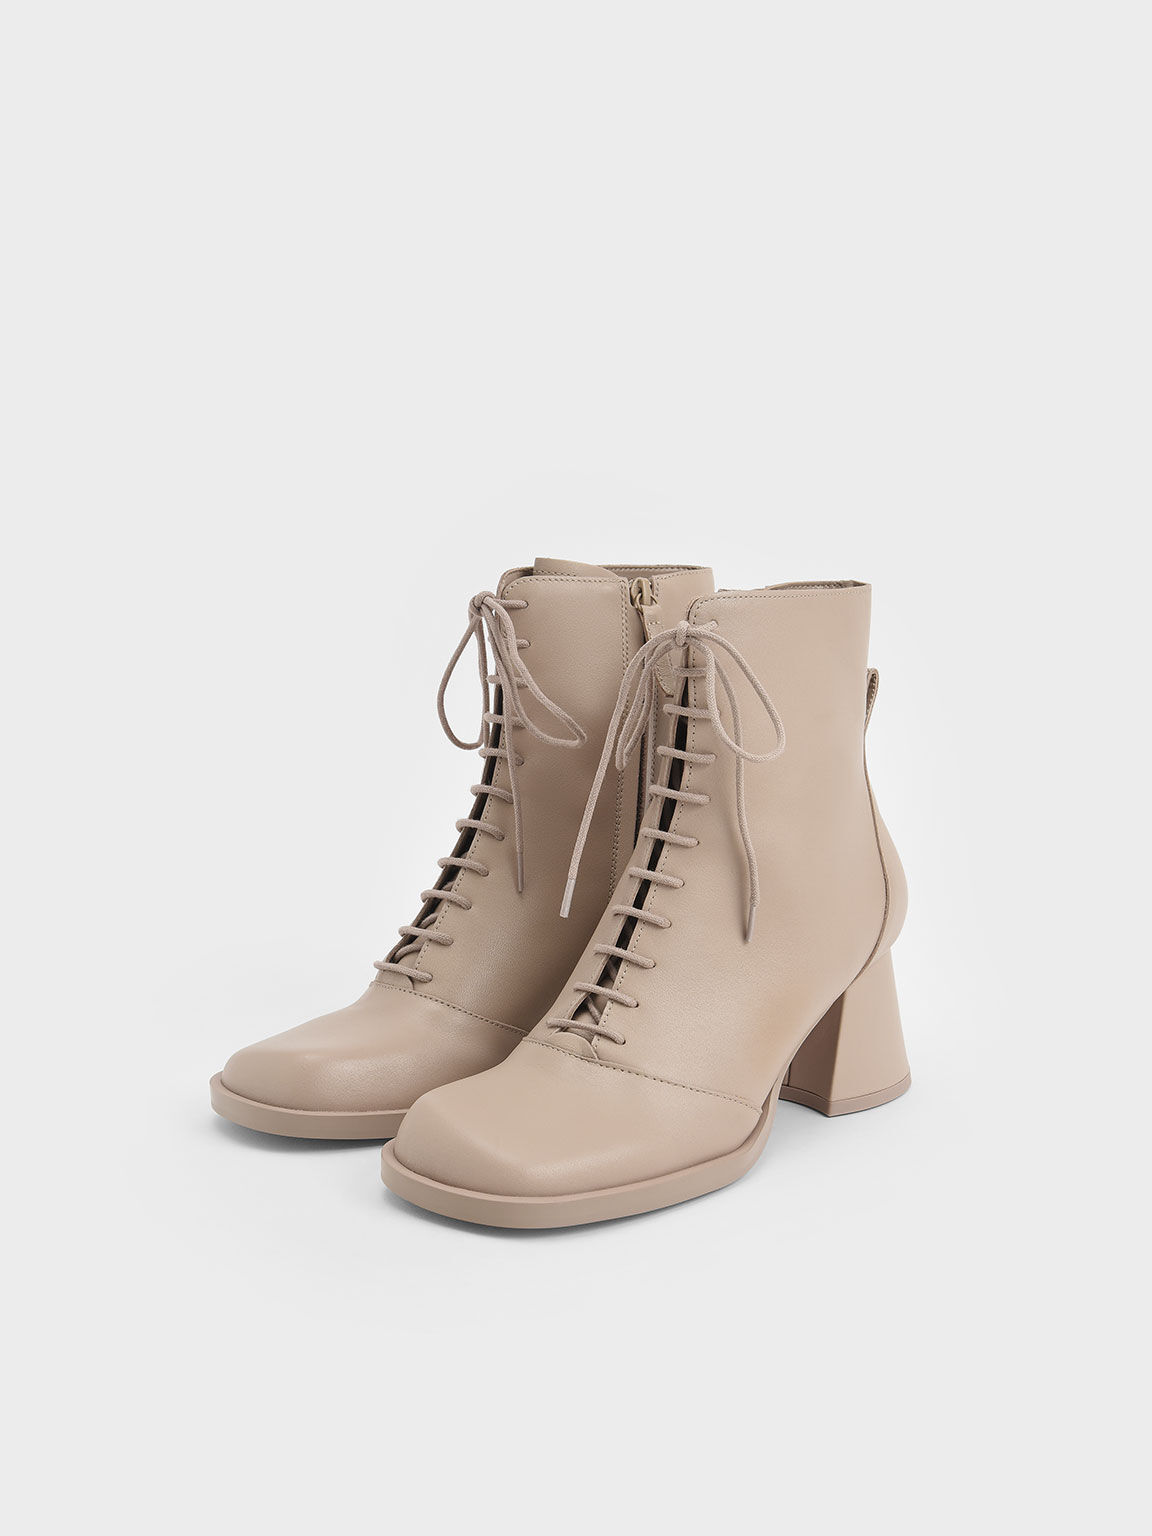 Leather Lace-Up Ankle Boots, Taupe, hi-res